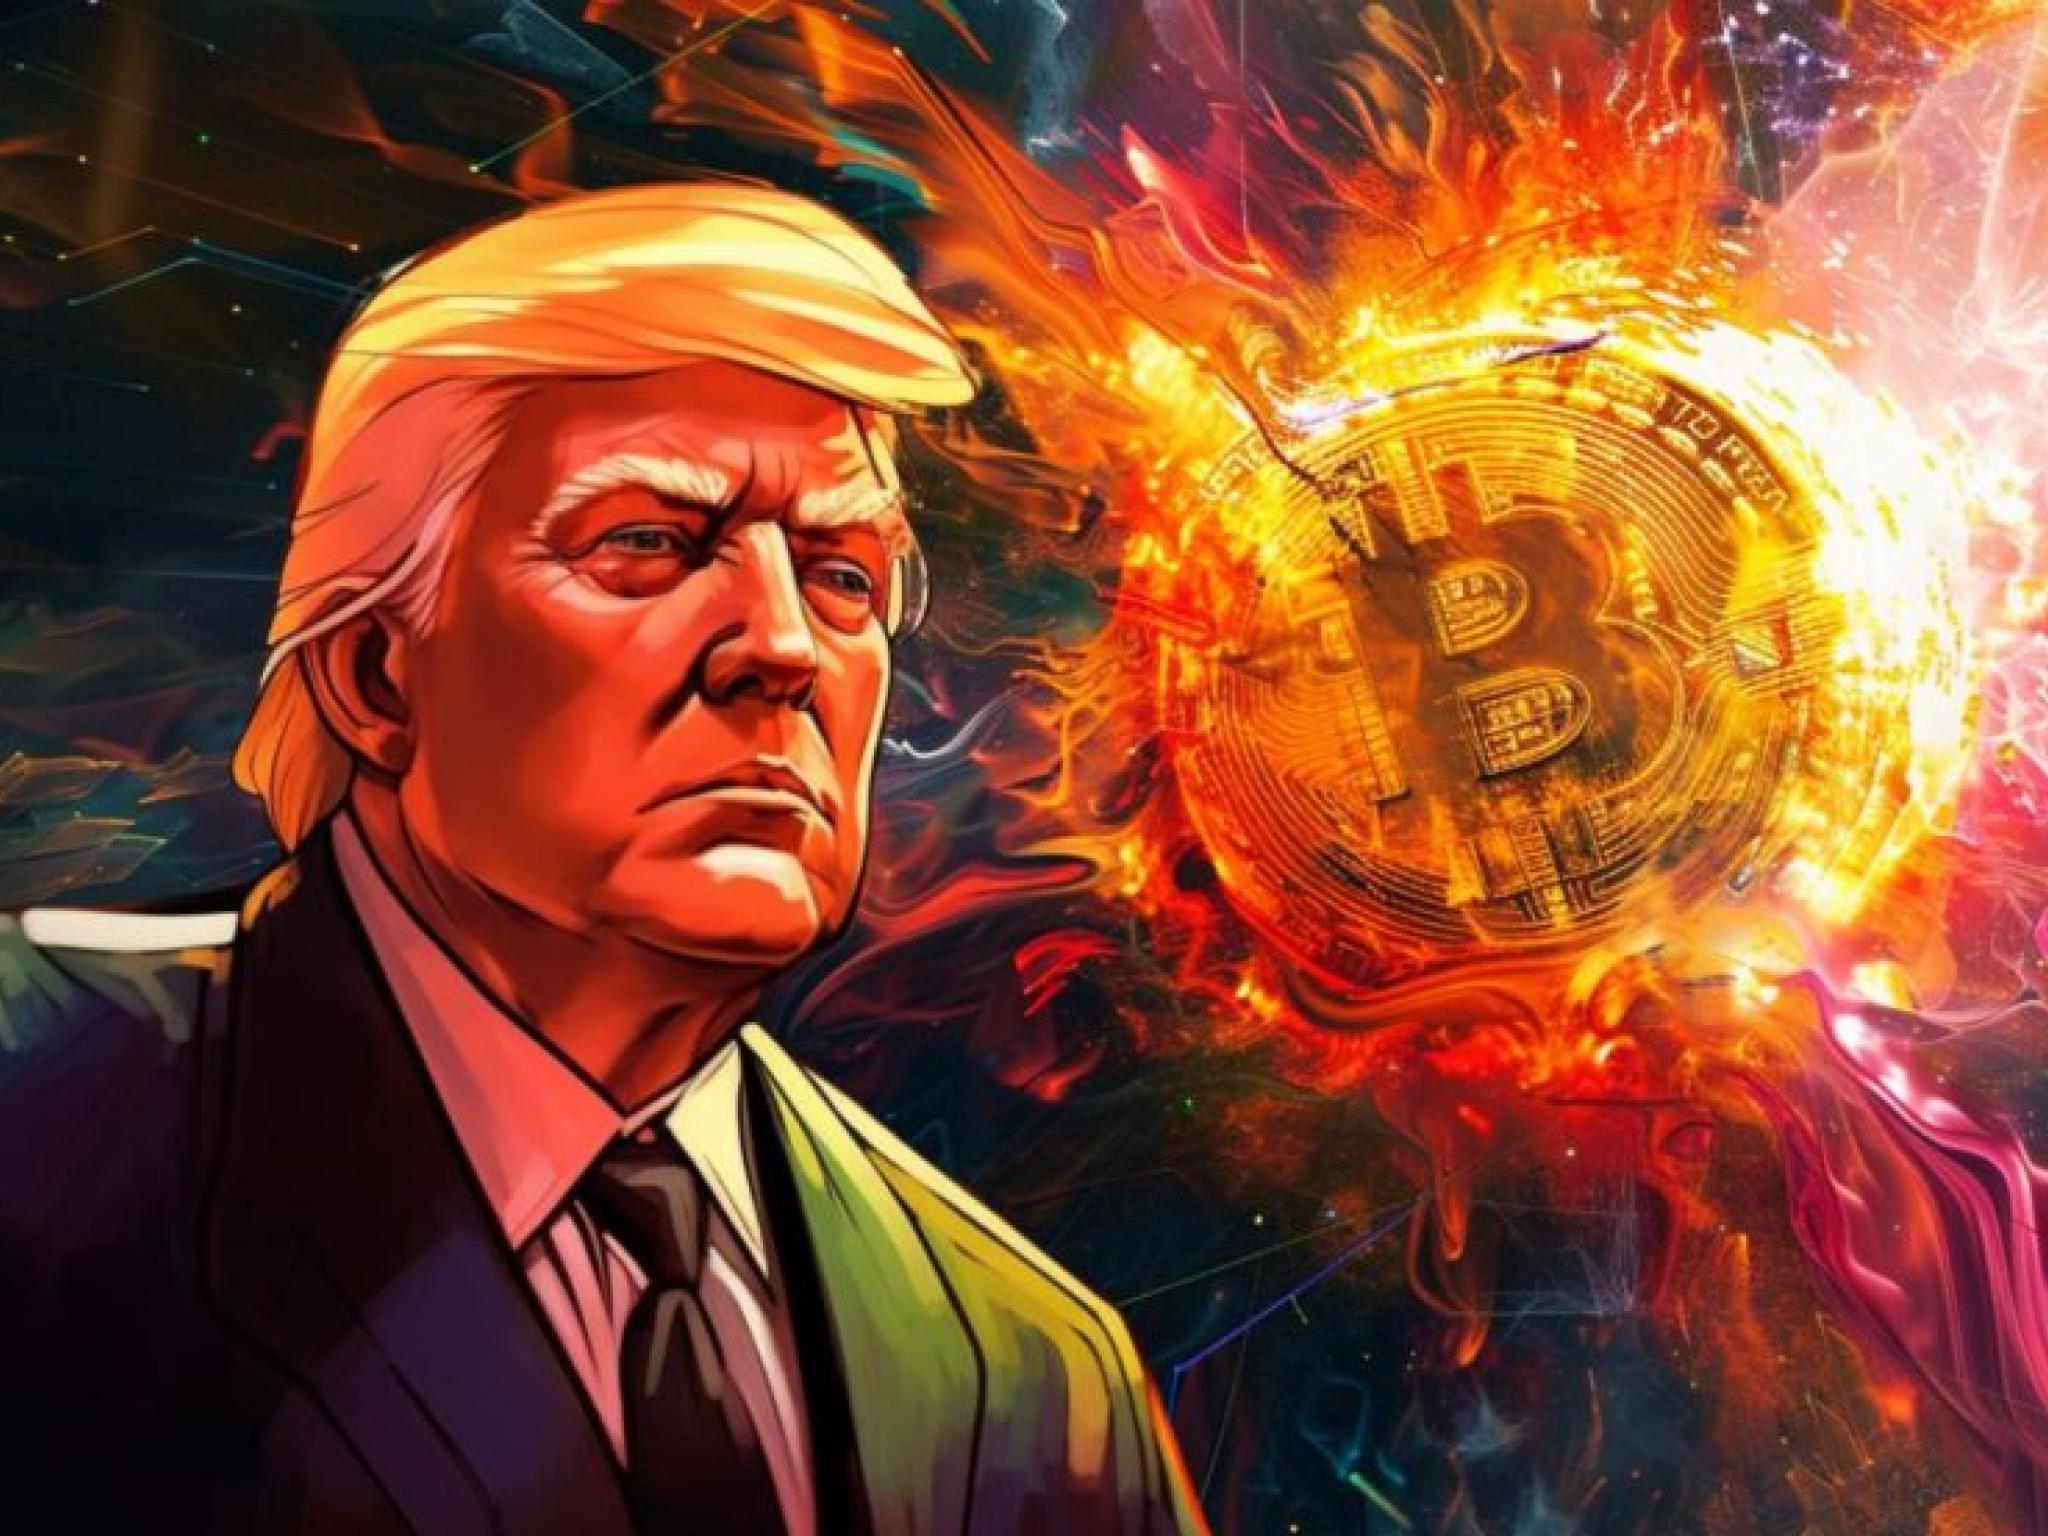  donald-trump-wants-all-the-remaining-bitcoin-to-be-made-in-the-usa 